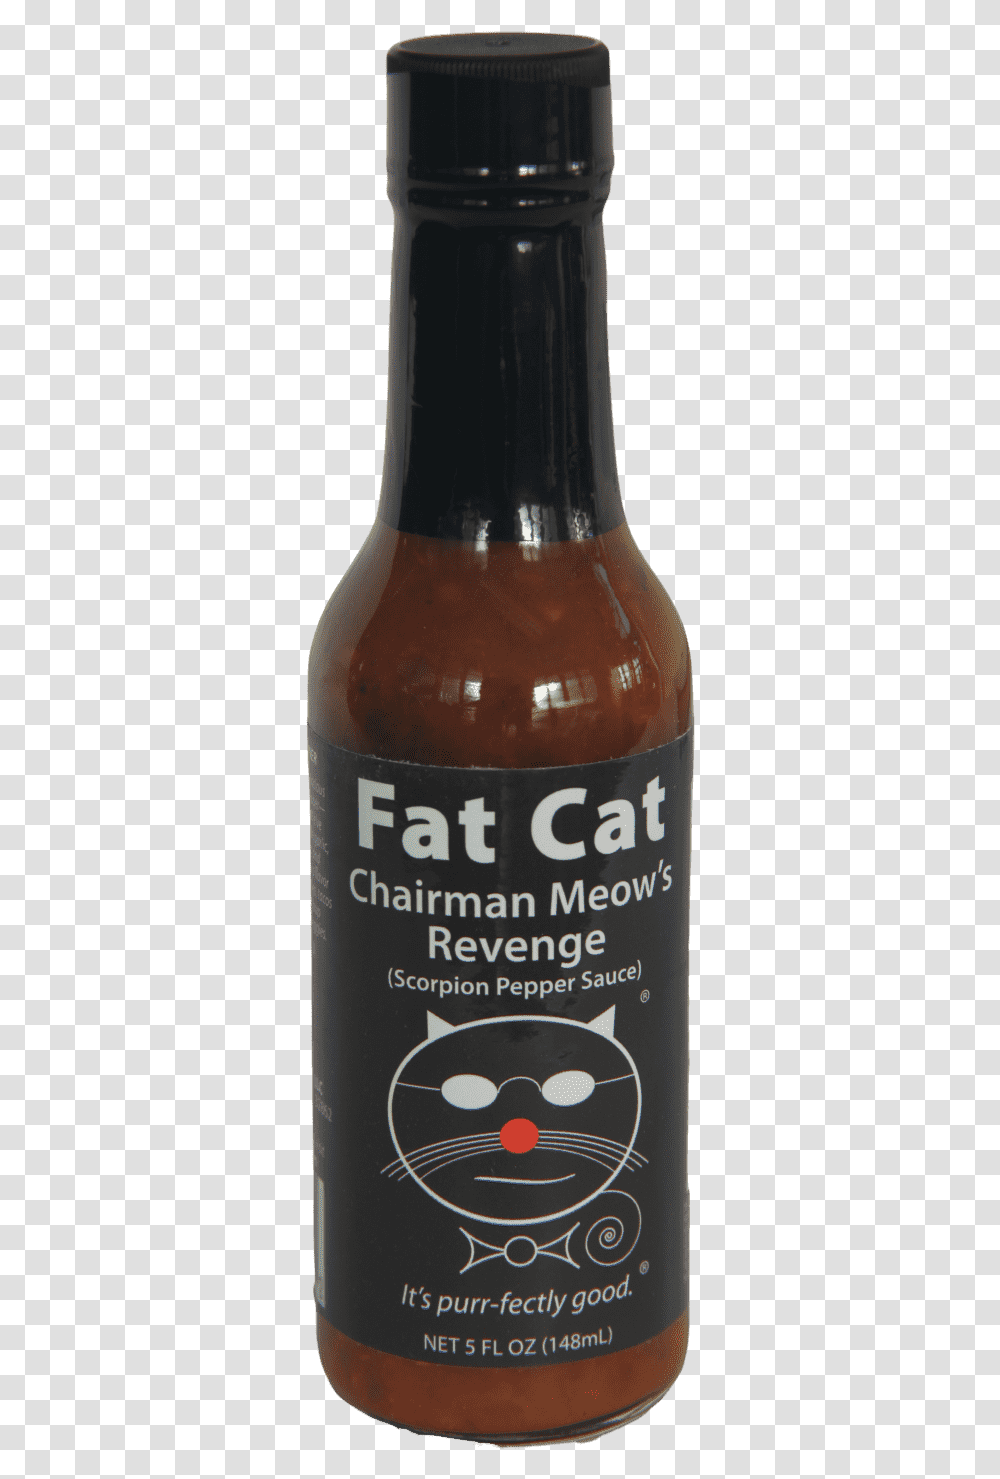 Fat Cat Chairman Meows Revenge Scorpion Pepper Sauce Tomato Sauce, Beer, Alcohol, Beverage, Drink Transparent Png